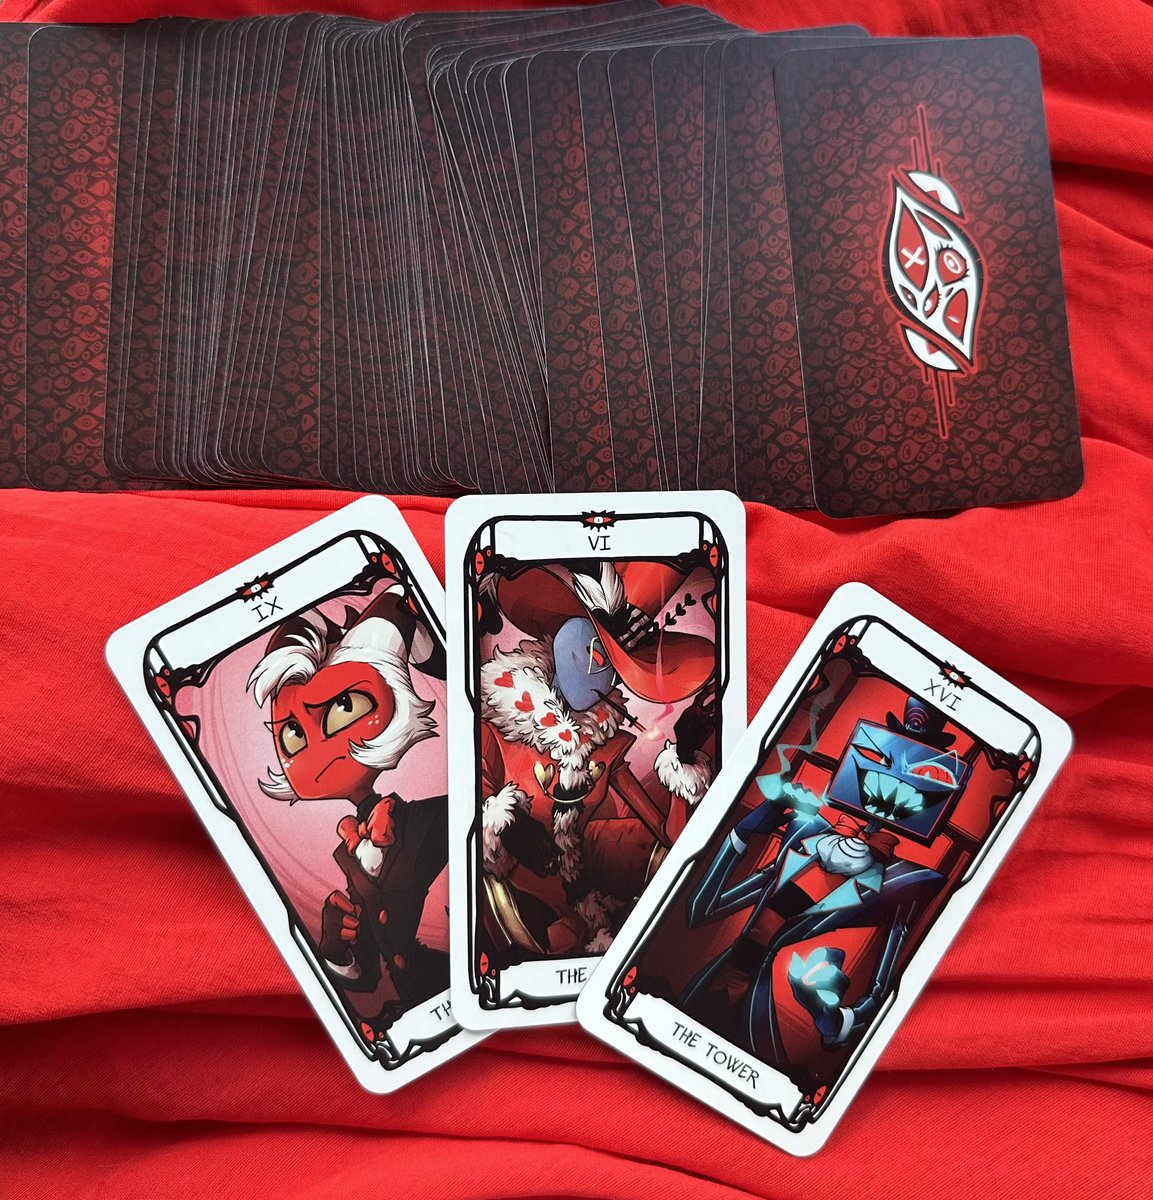 The Hazbin Hotel & Helluva Boss tarot deck by @quiem_rhole is SO gorgeous, pictures do NOT do it justice! My readings have never looked so hellish 🔥❤️